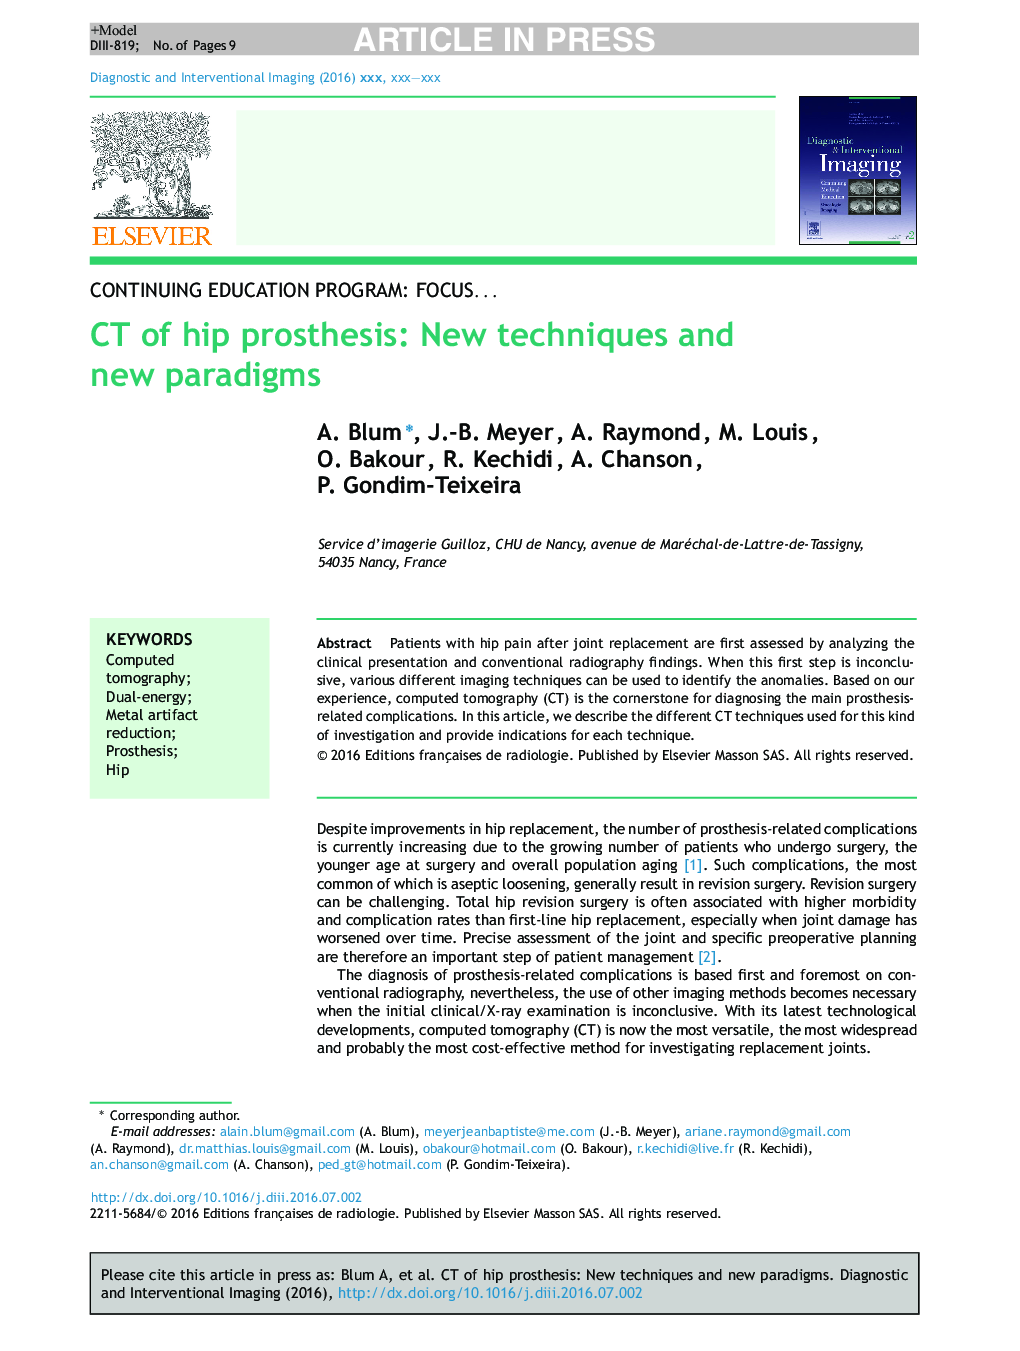 CT of hip prosthesis: New techniques and new paradigms